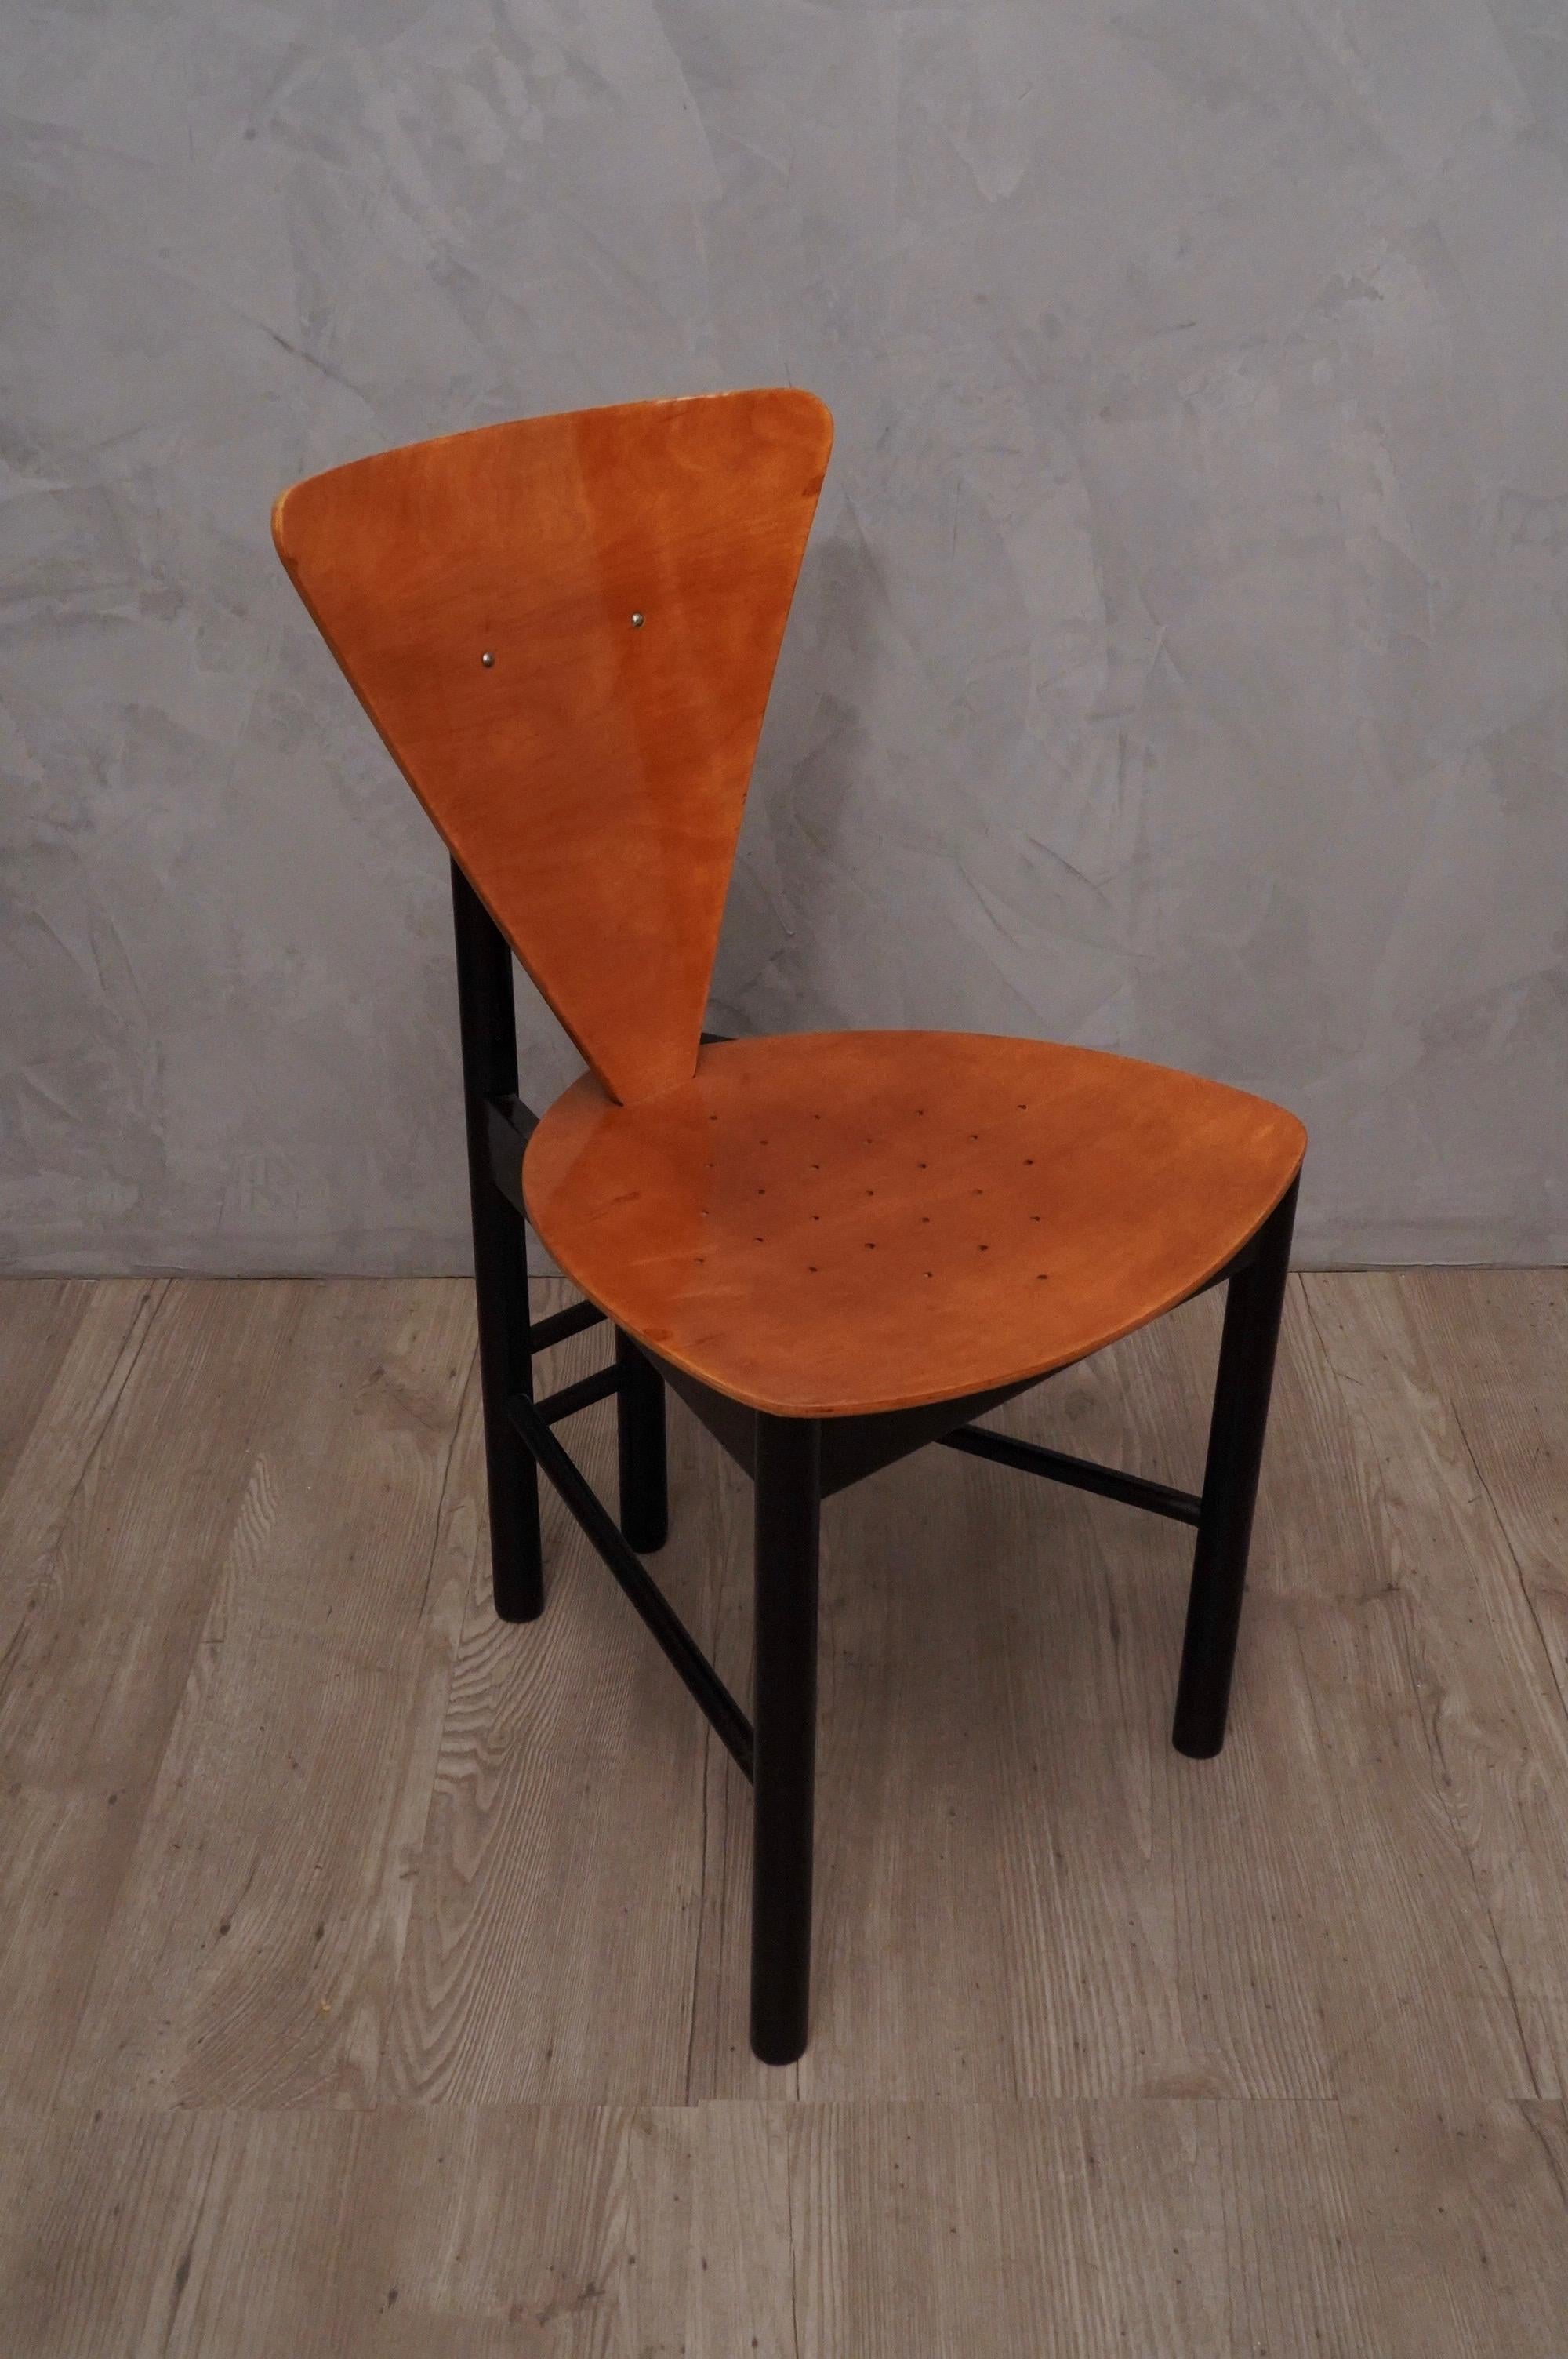 triangle shaped chair